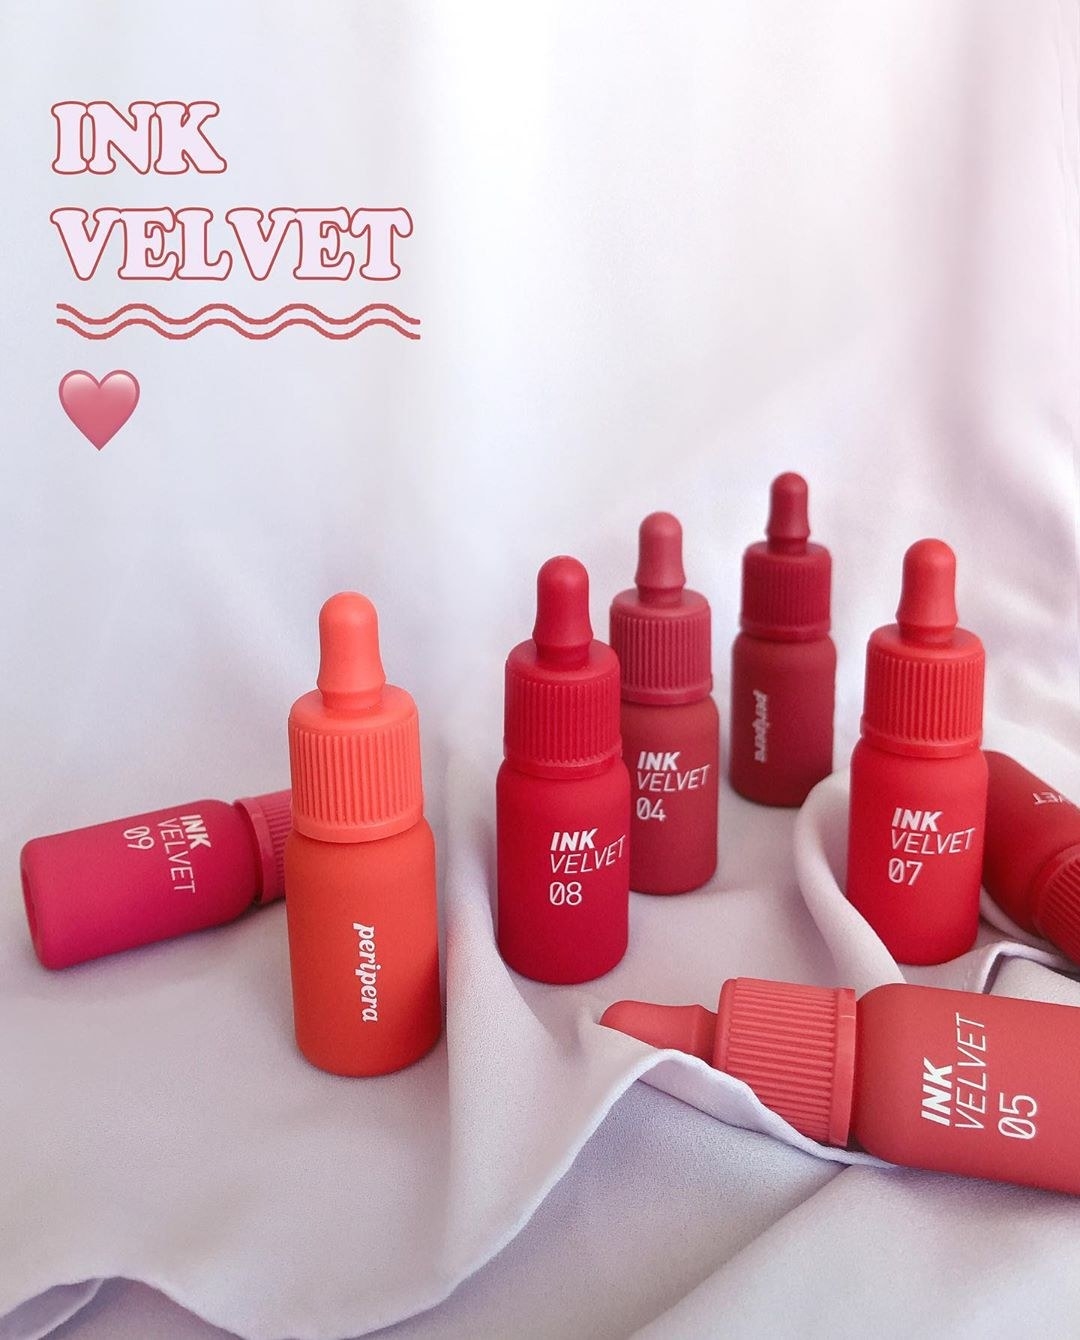 Multiple bottles of Peripera&#x27;s Ink Velvet lip stains in different red and pink shades